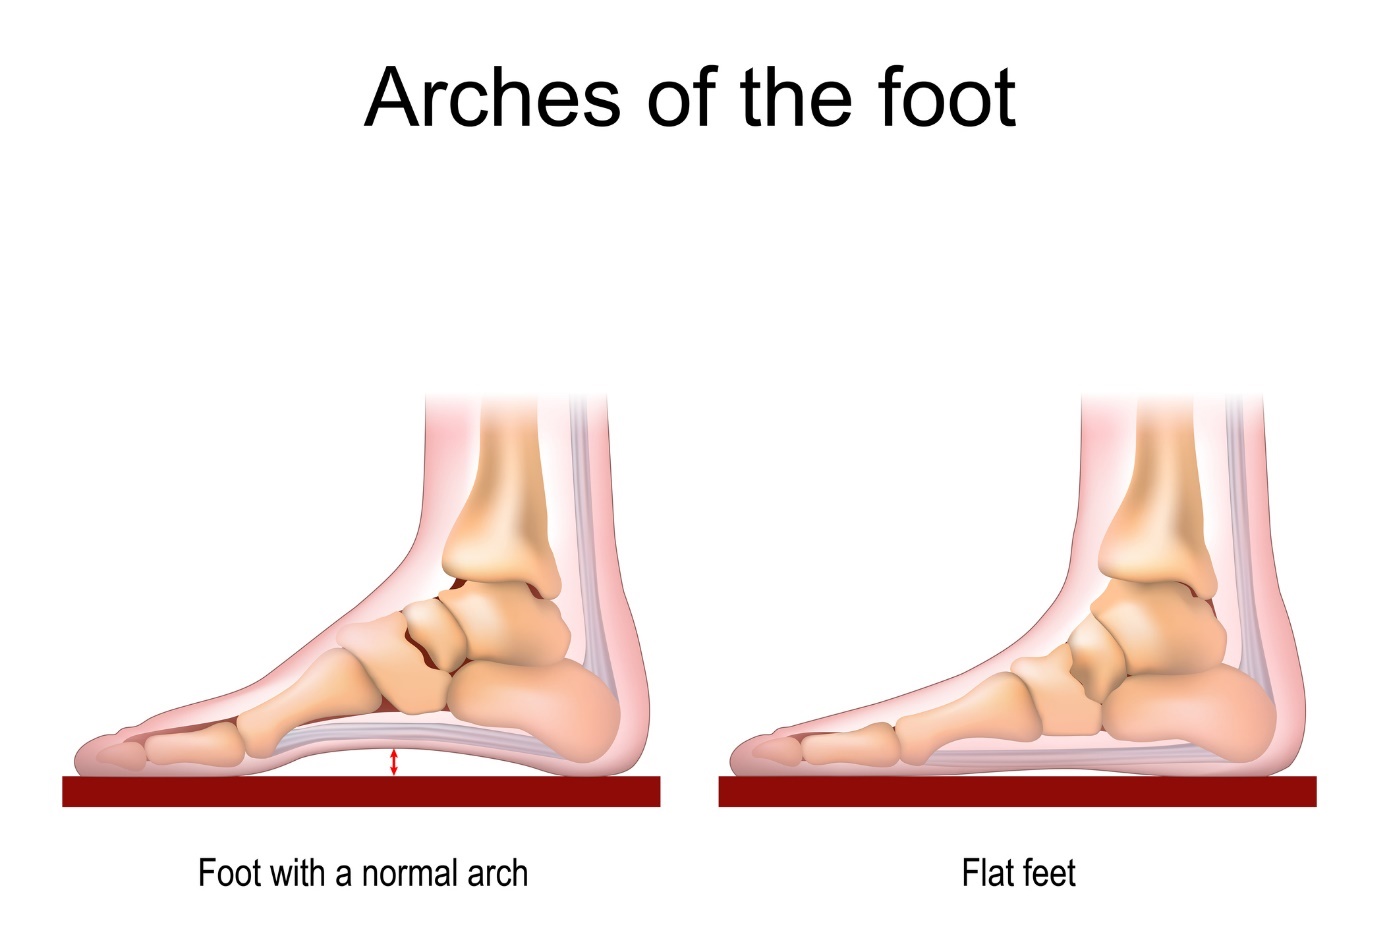 Normal and flat foot